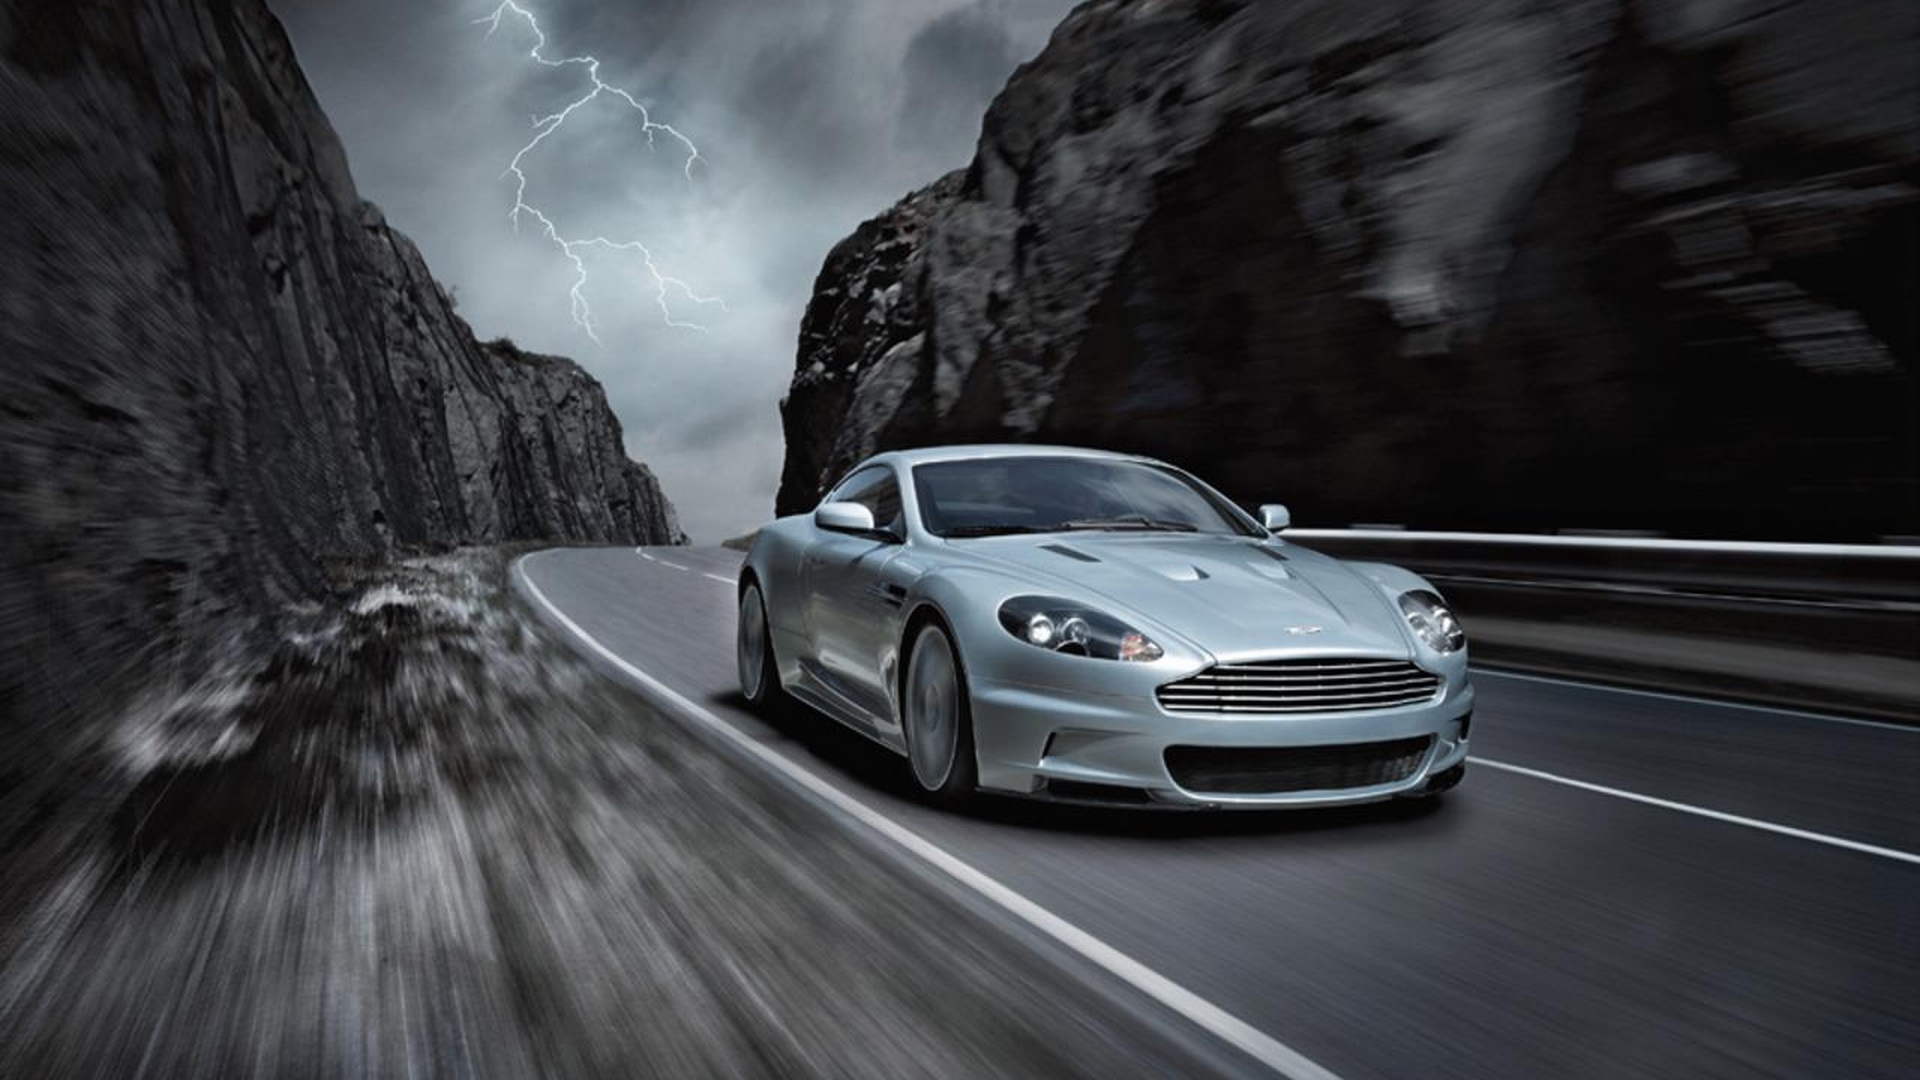 A sleek and powerful Aston Martin One-77 vehicle, perfect for desktop wallpaper.